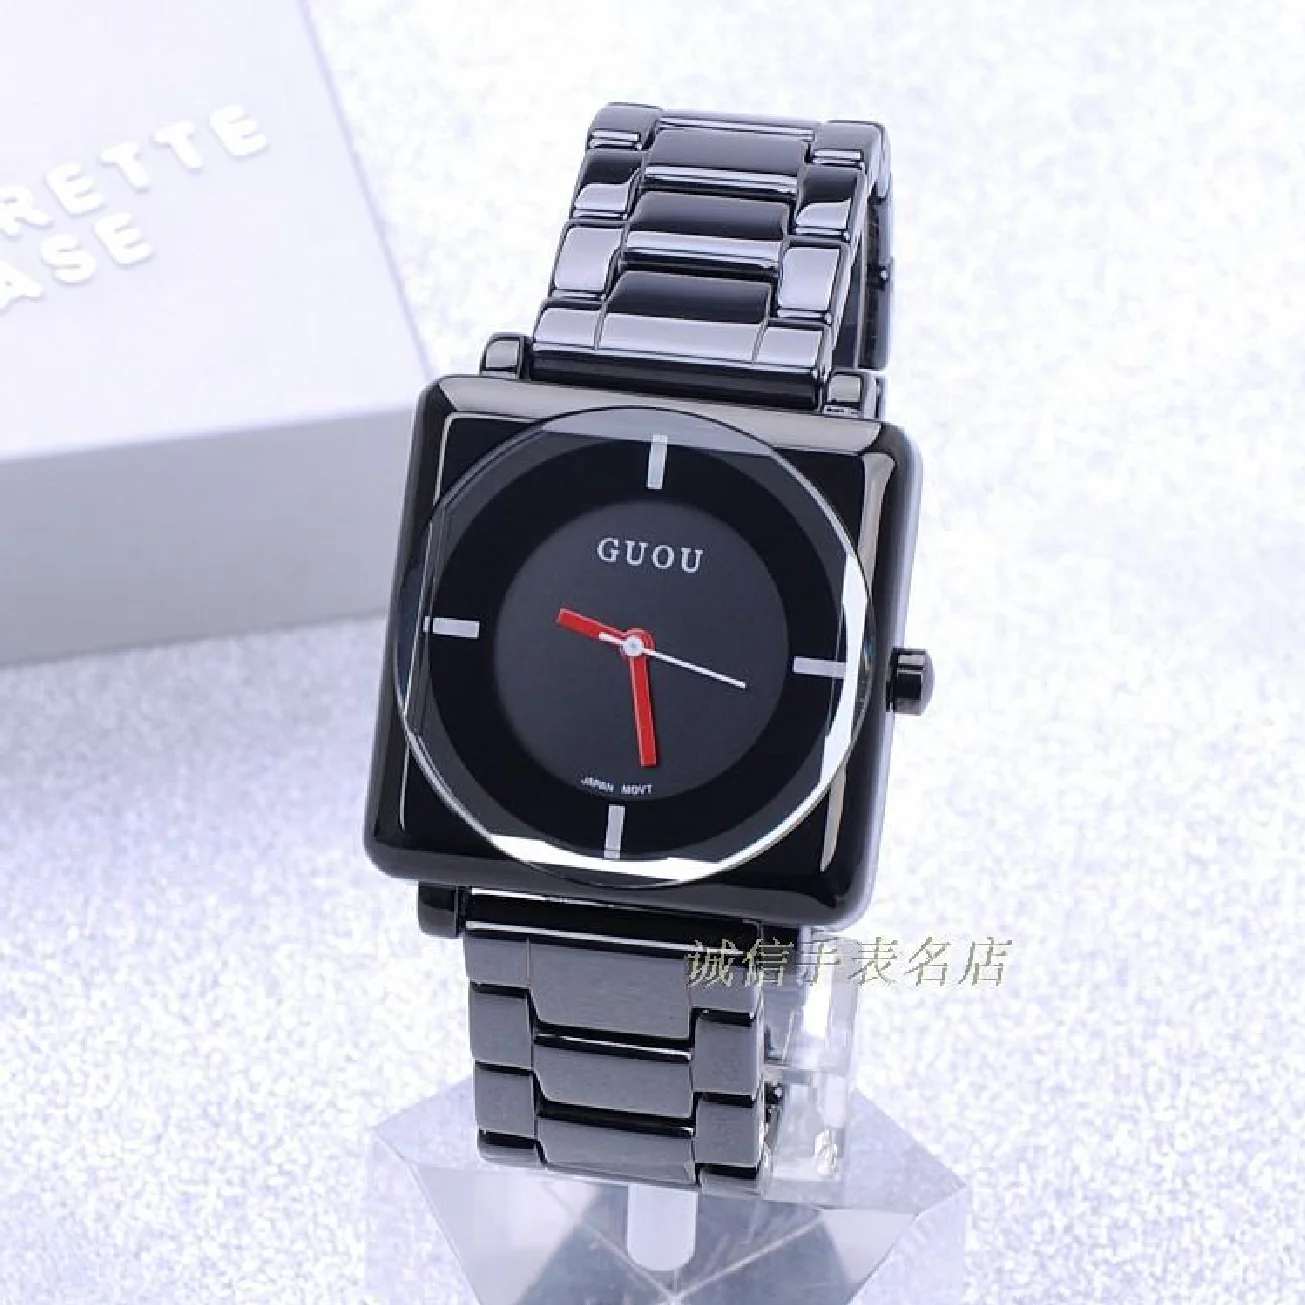 Fashion Guou Top Brand Quartz Waterproof Women's Watch Square Dial Black Full Stainless Steel Band Luxury Gift Lady WristWatch enlarge